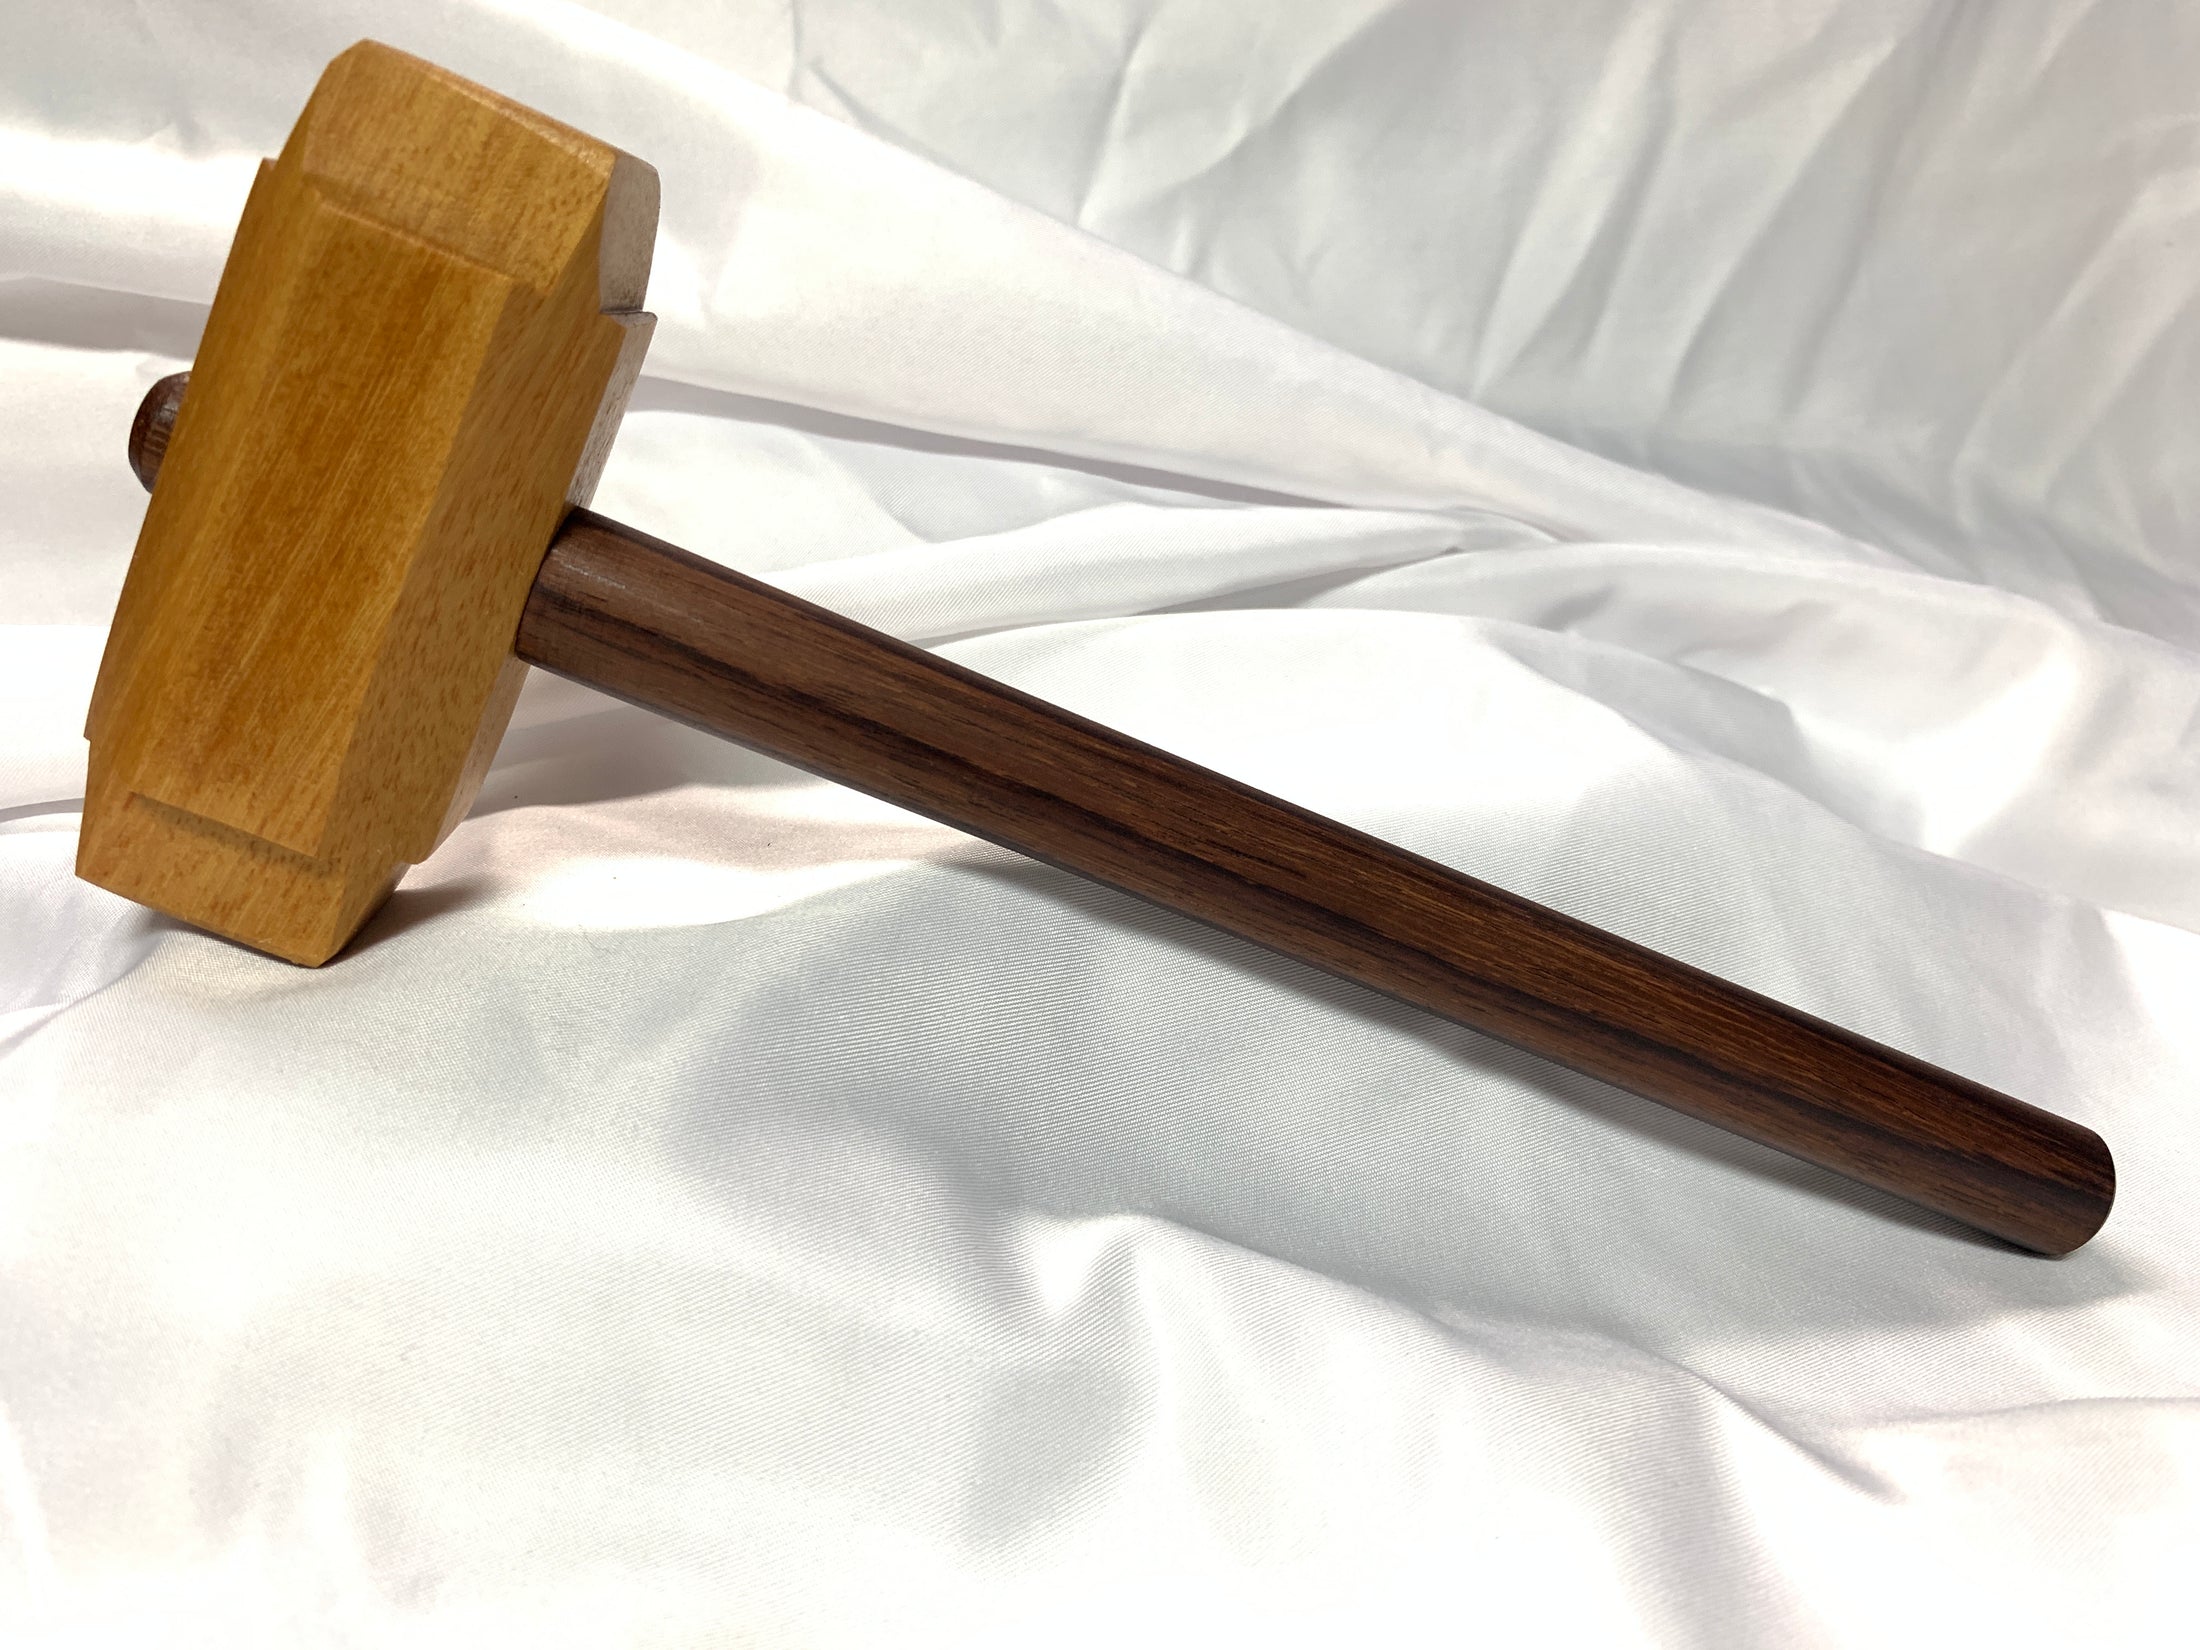 Thors Hammer Woodworking Mallet Osage Orange Head with East Indian Rosewood Handle Kings Fine Woodworking